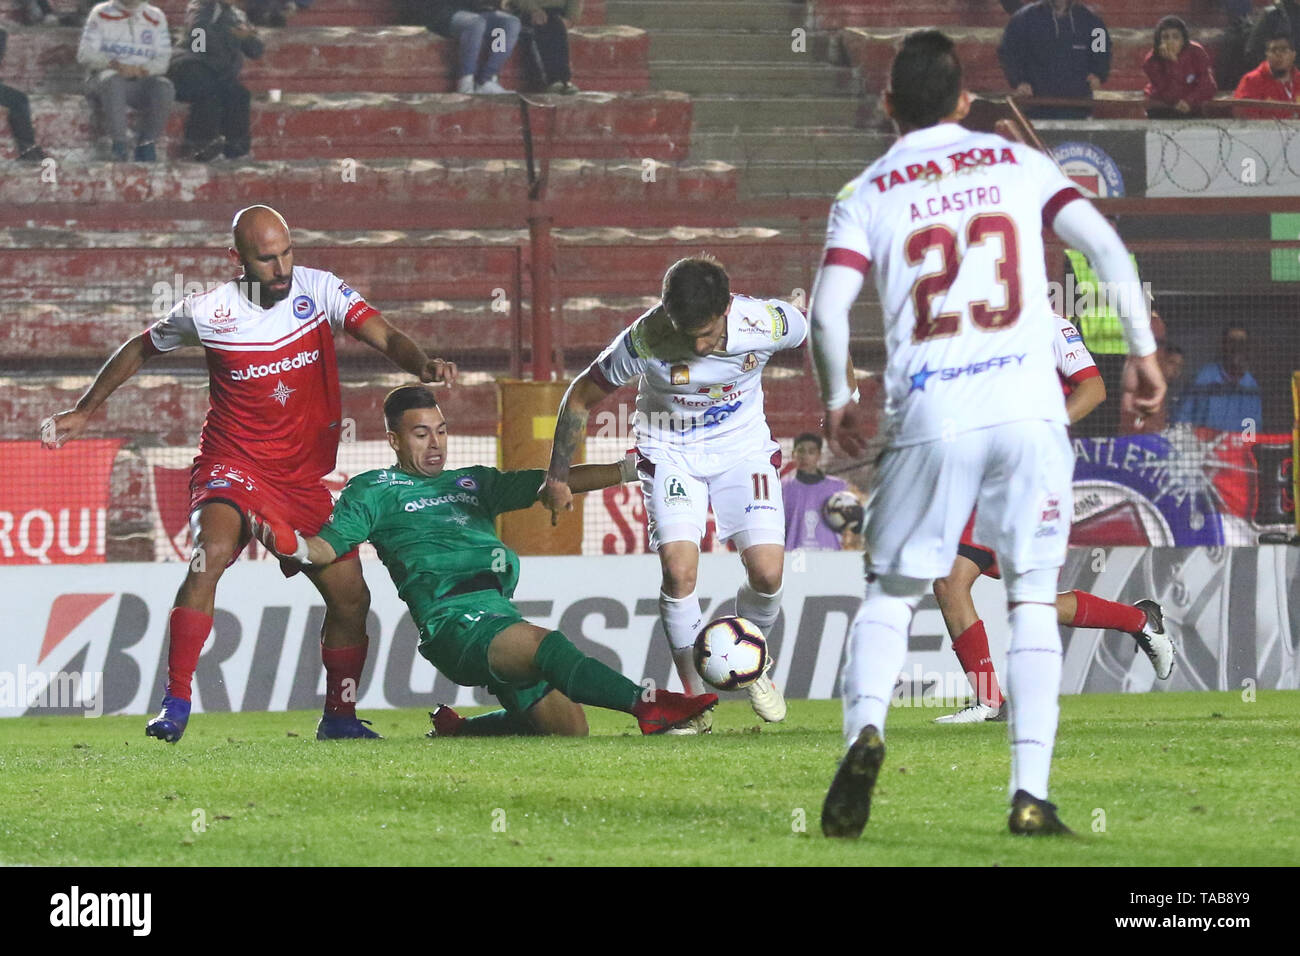 BUENOS AIRES, 23.05.2019: Lucas Chavez, goalkeeper of Argentinos Jrs., during the match between Argentinos Juniors and Deportes Tolima for the 2nd rou Stock Photo